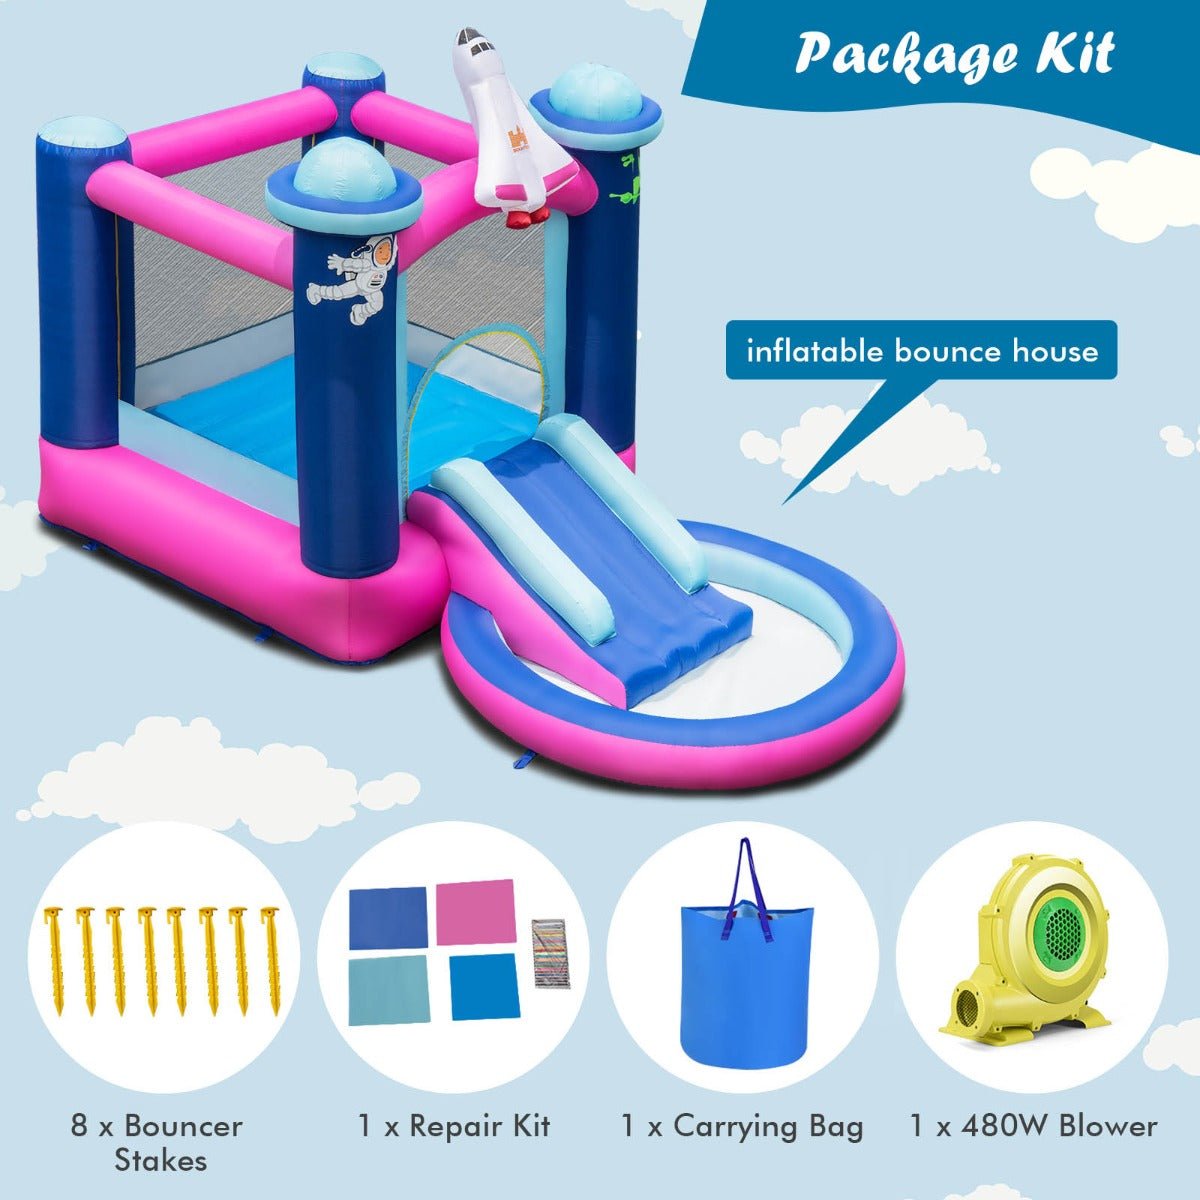 Kids Inflatable Space Bounce House - Jump, Slide & Discover the Stars